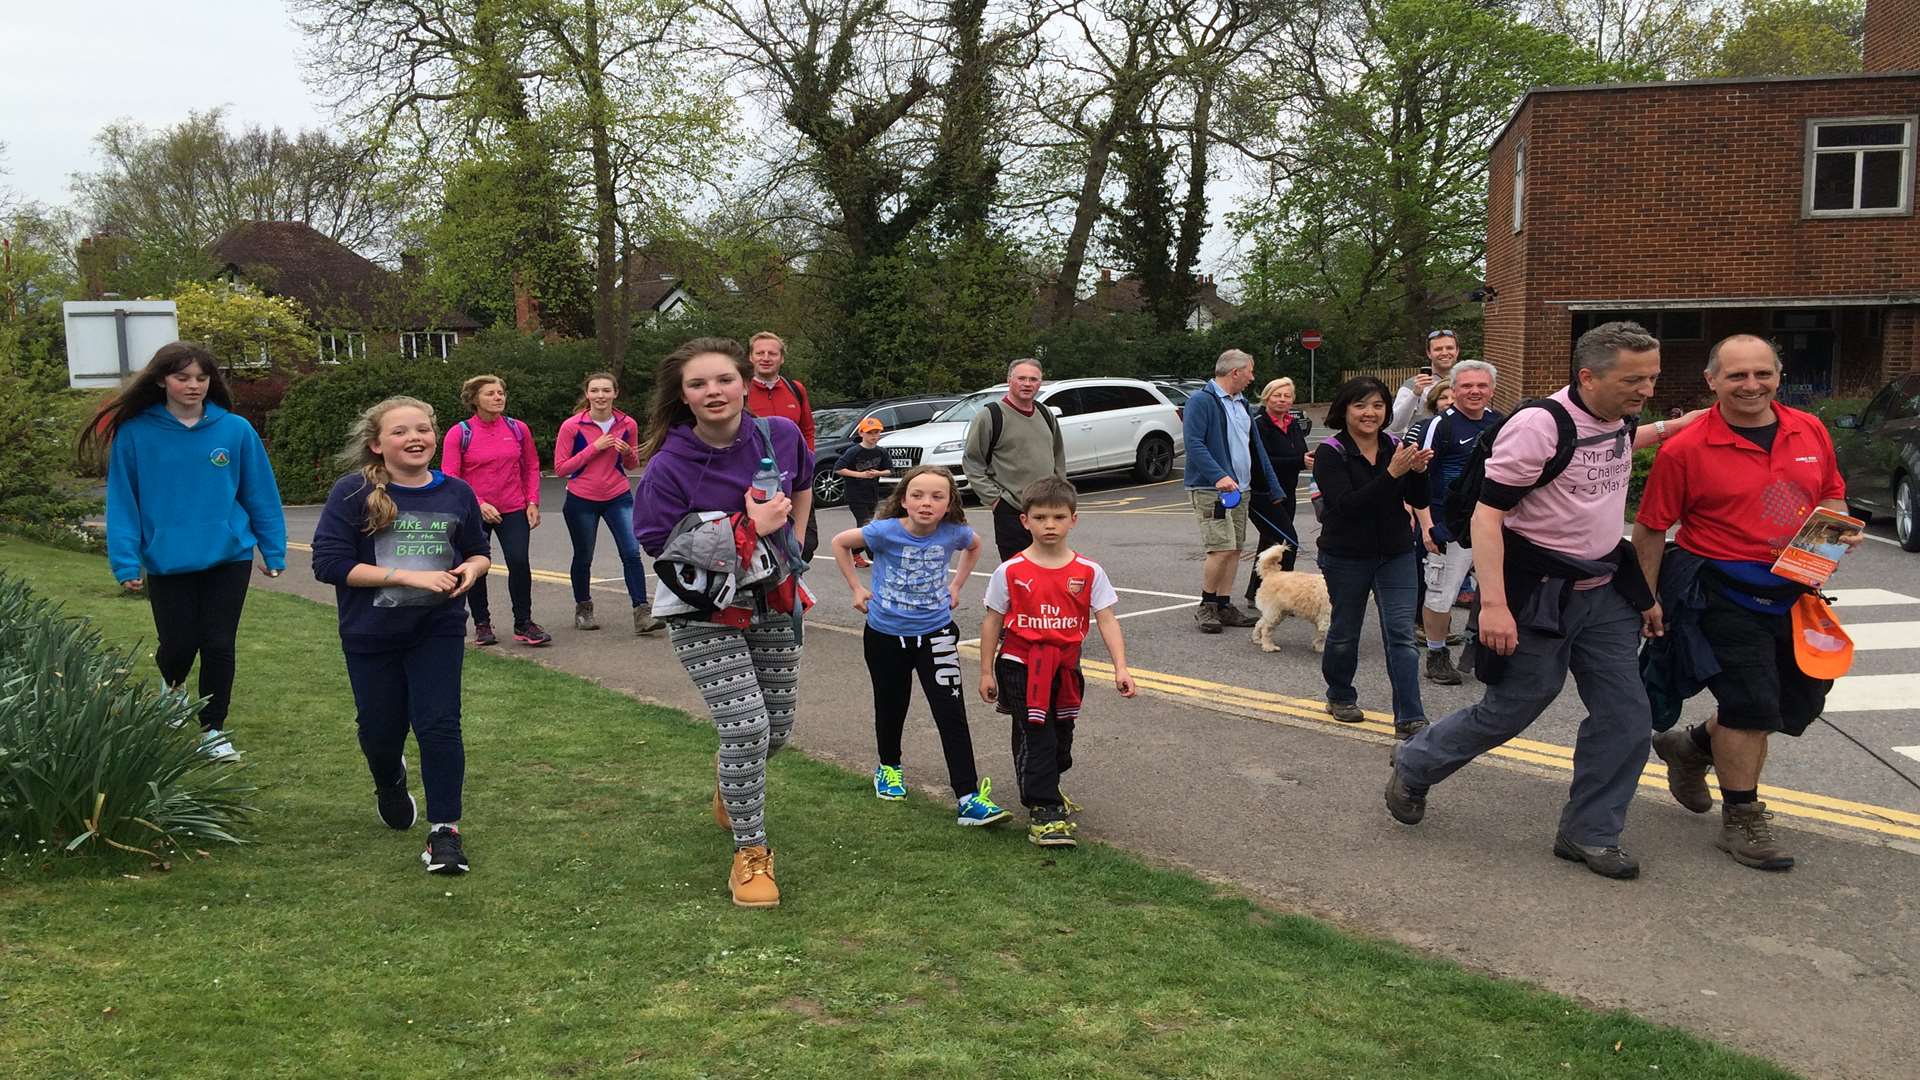 Supporters joined Mr Duffy and Mr Newman for part of the 55-mile walk to raise funds for Sevenoaks Primary School.